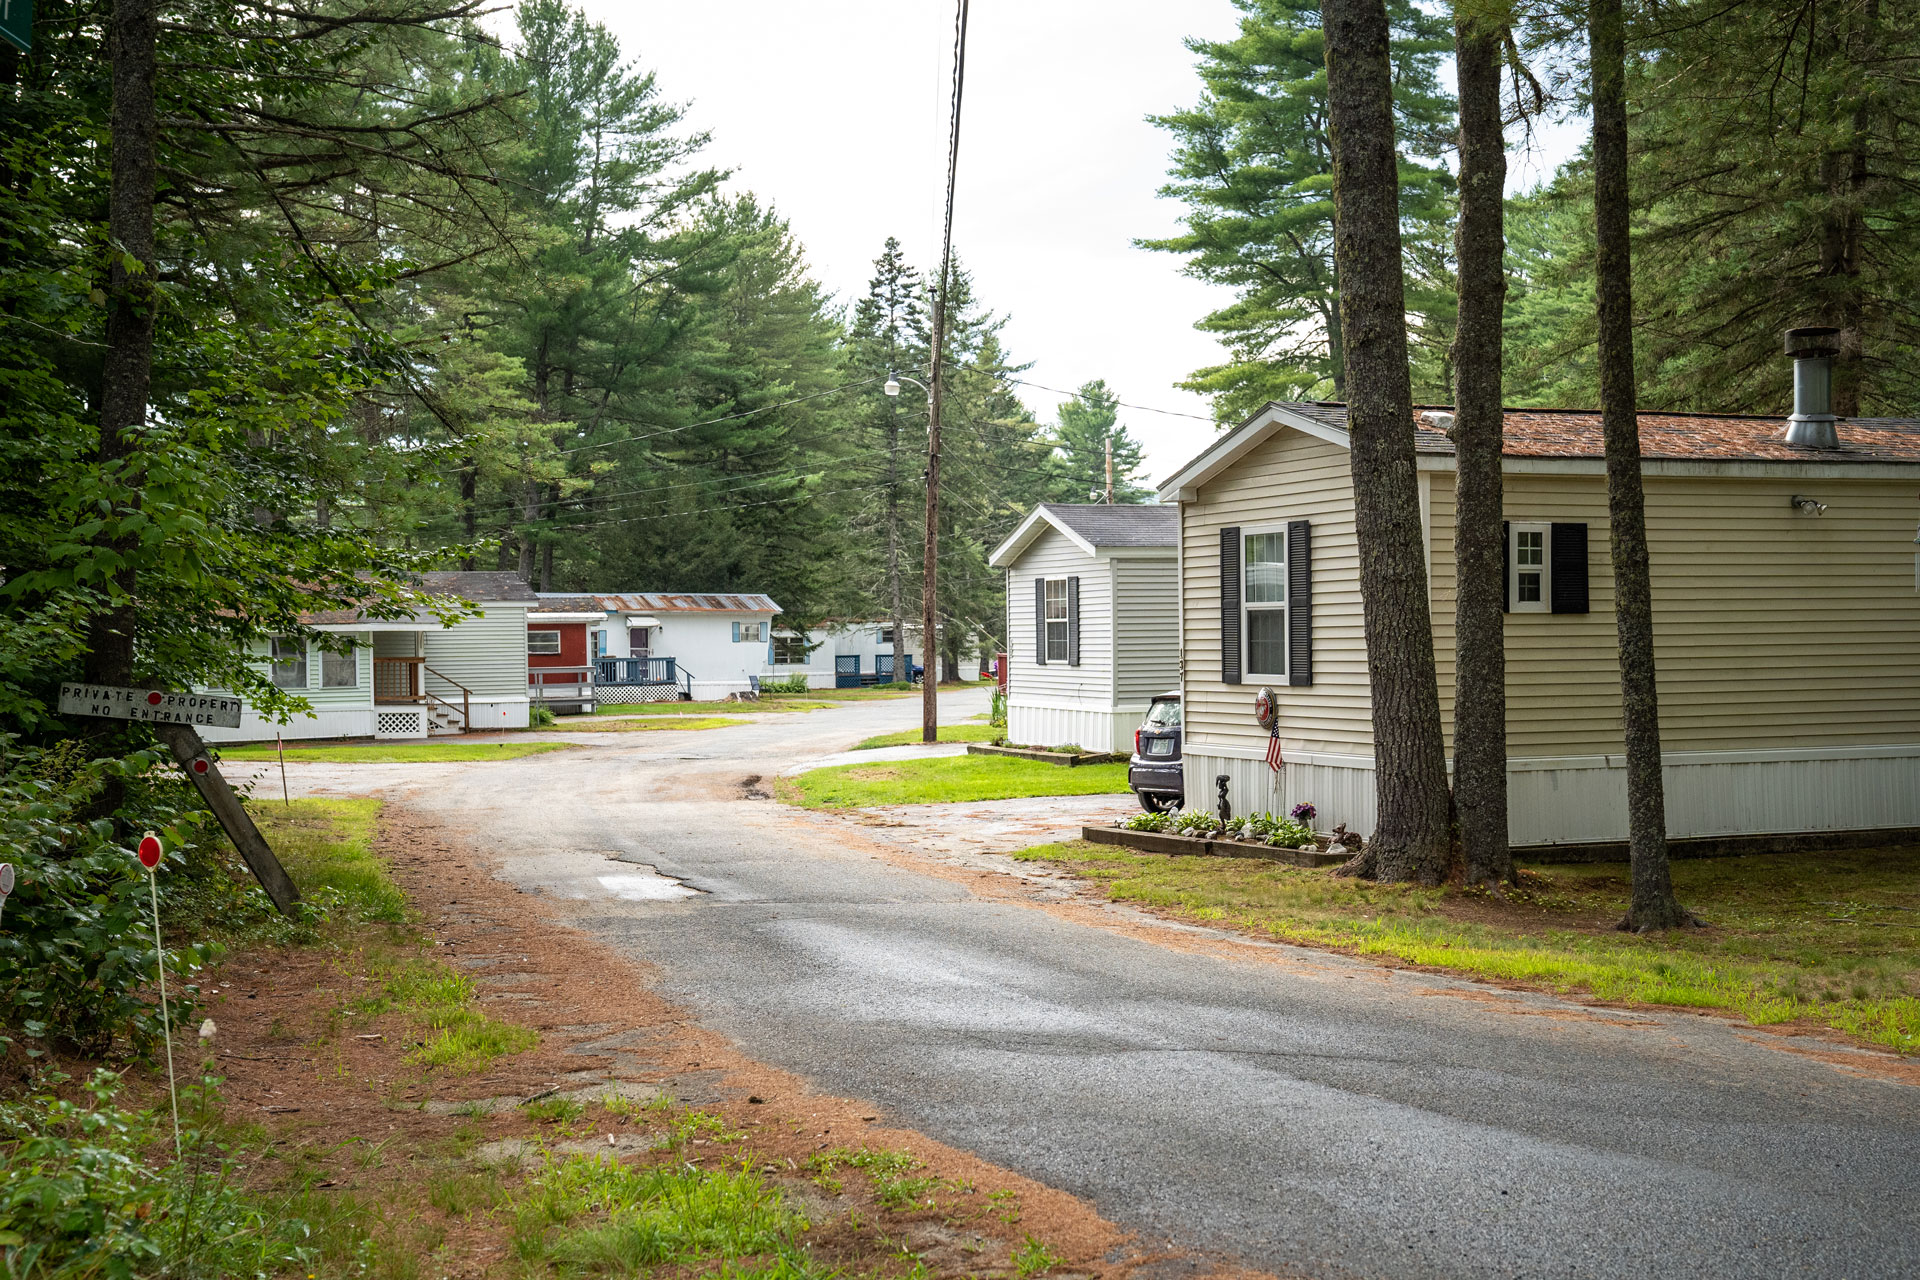 A street scene in Fox Hill Cooperative, whose residents saved their community by purchasing it.